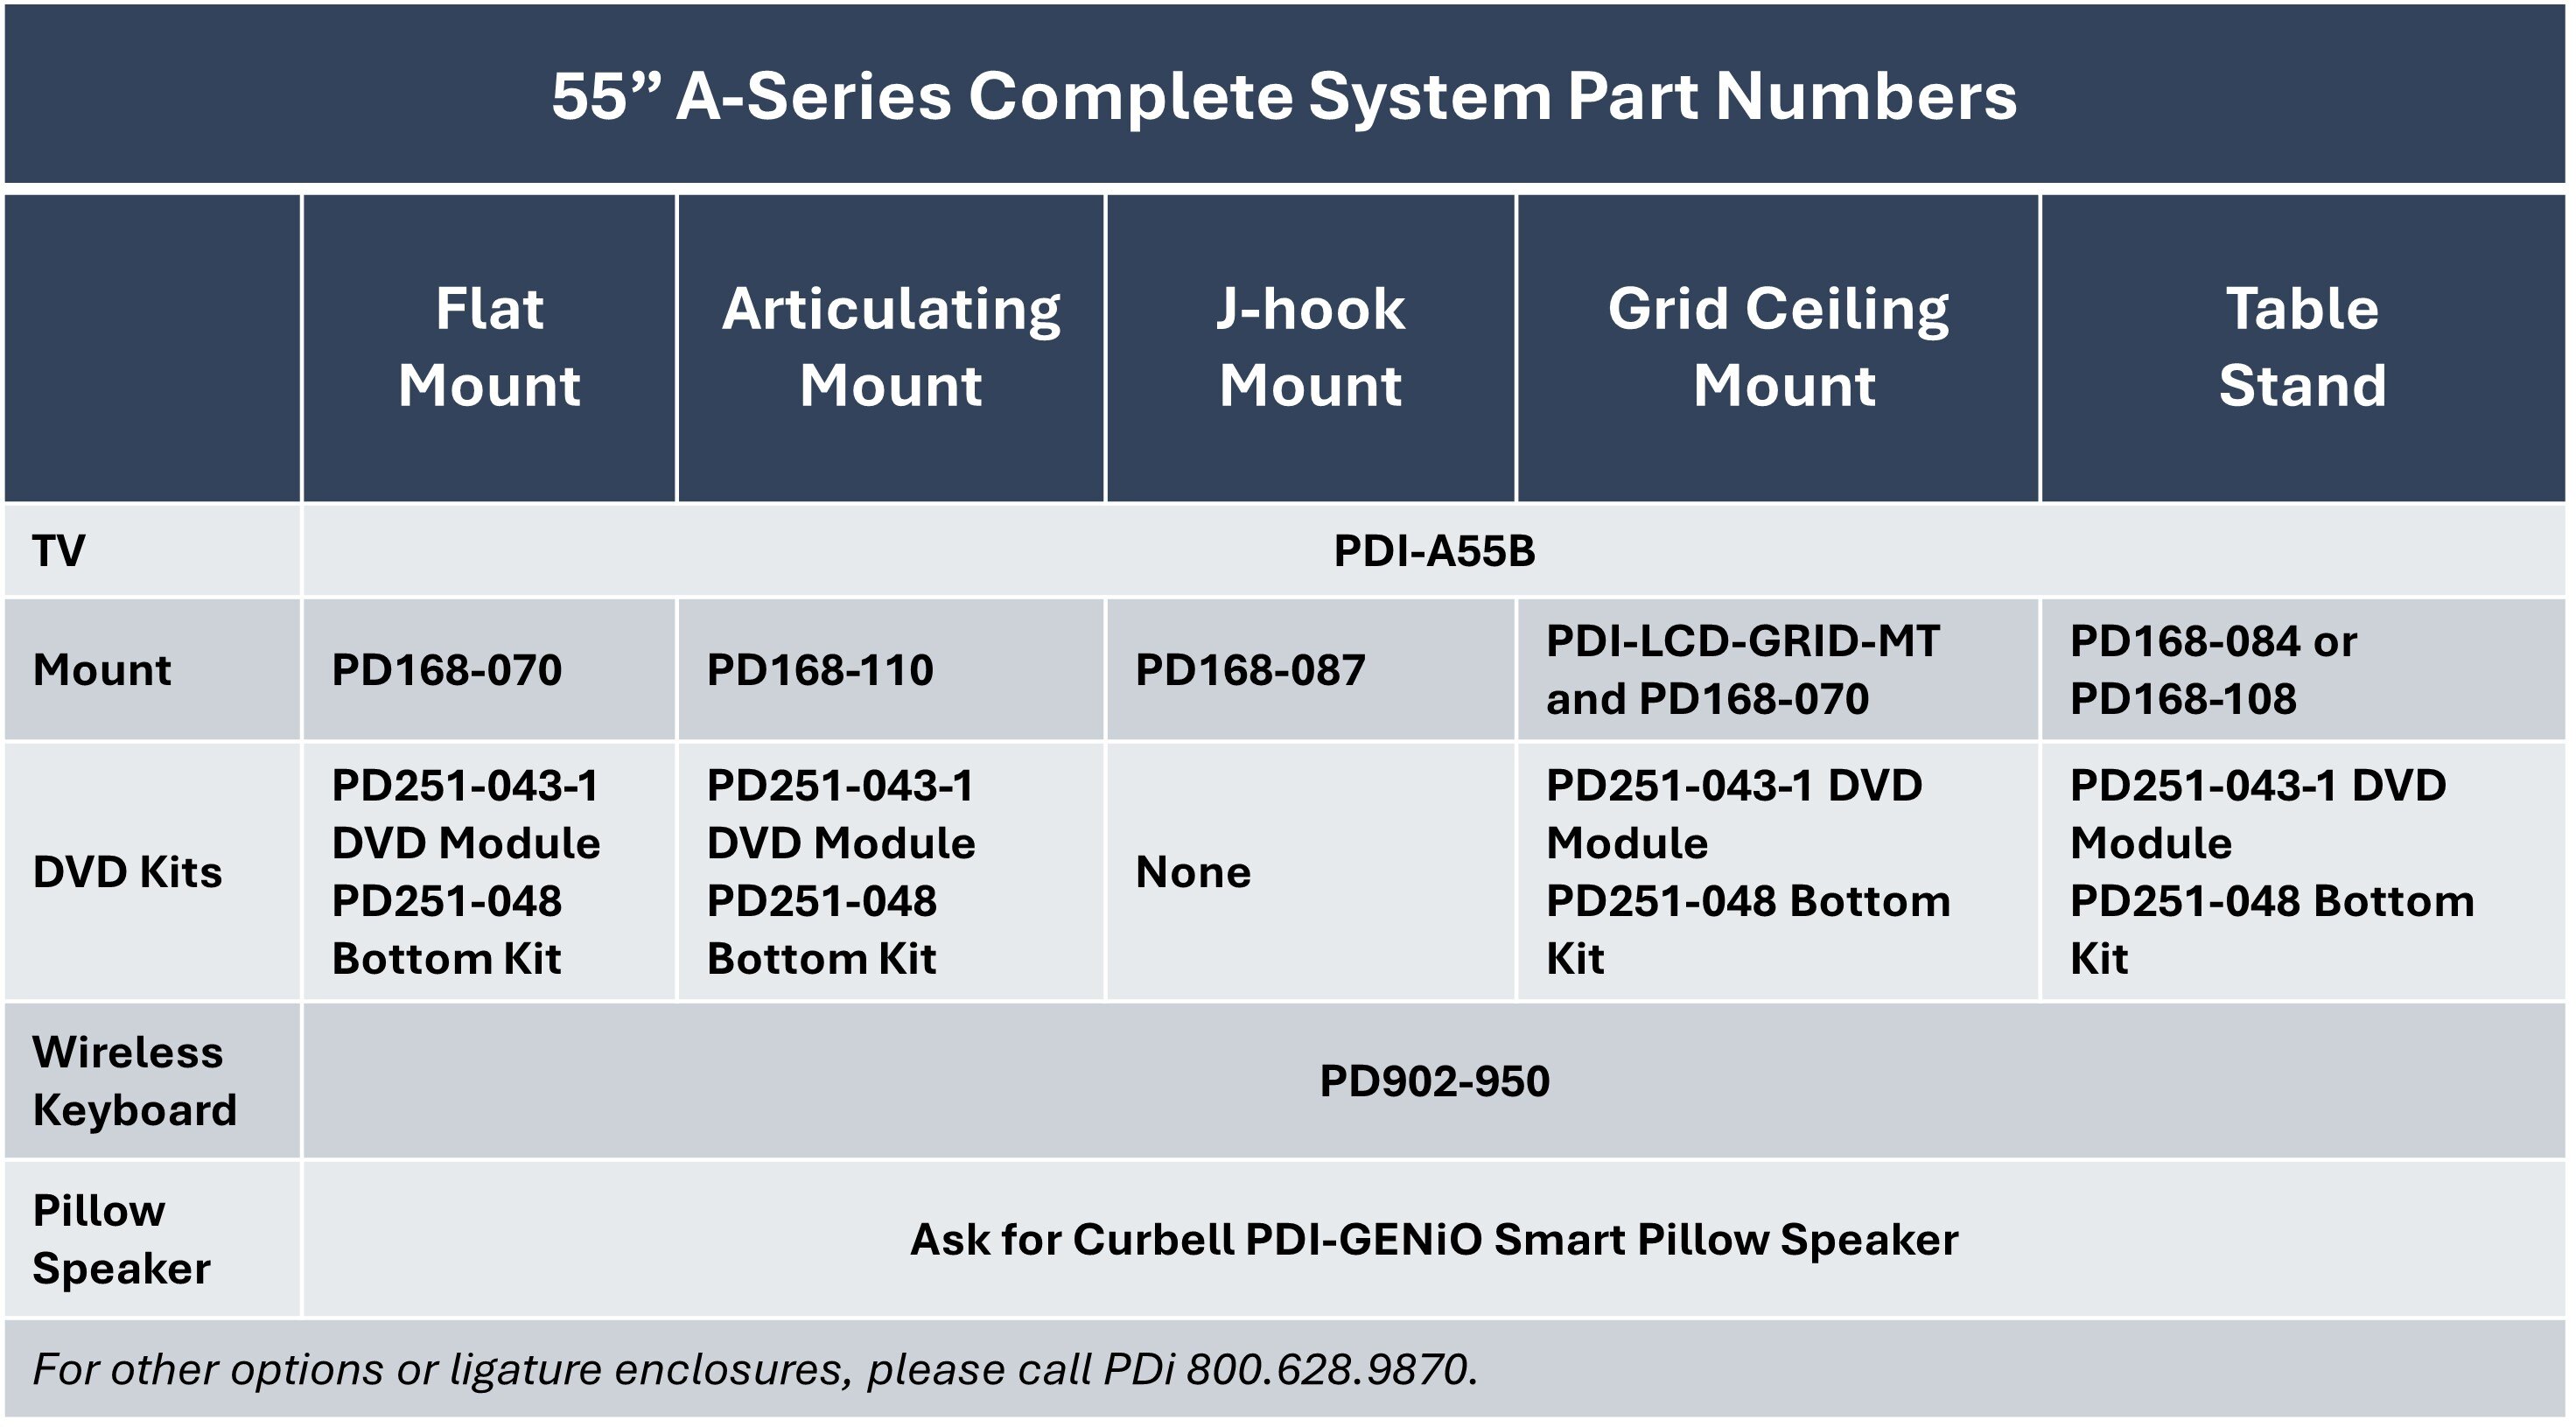 PDi Part Numbers for Complete 55